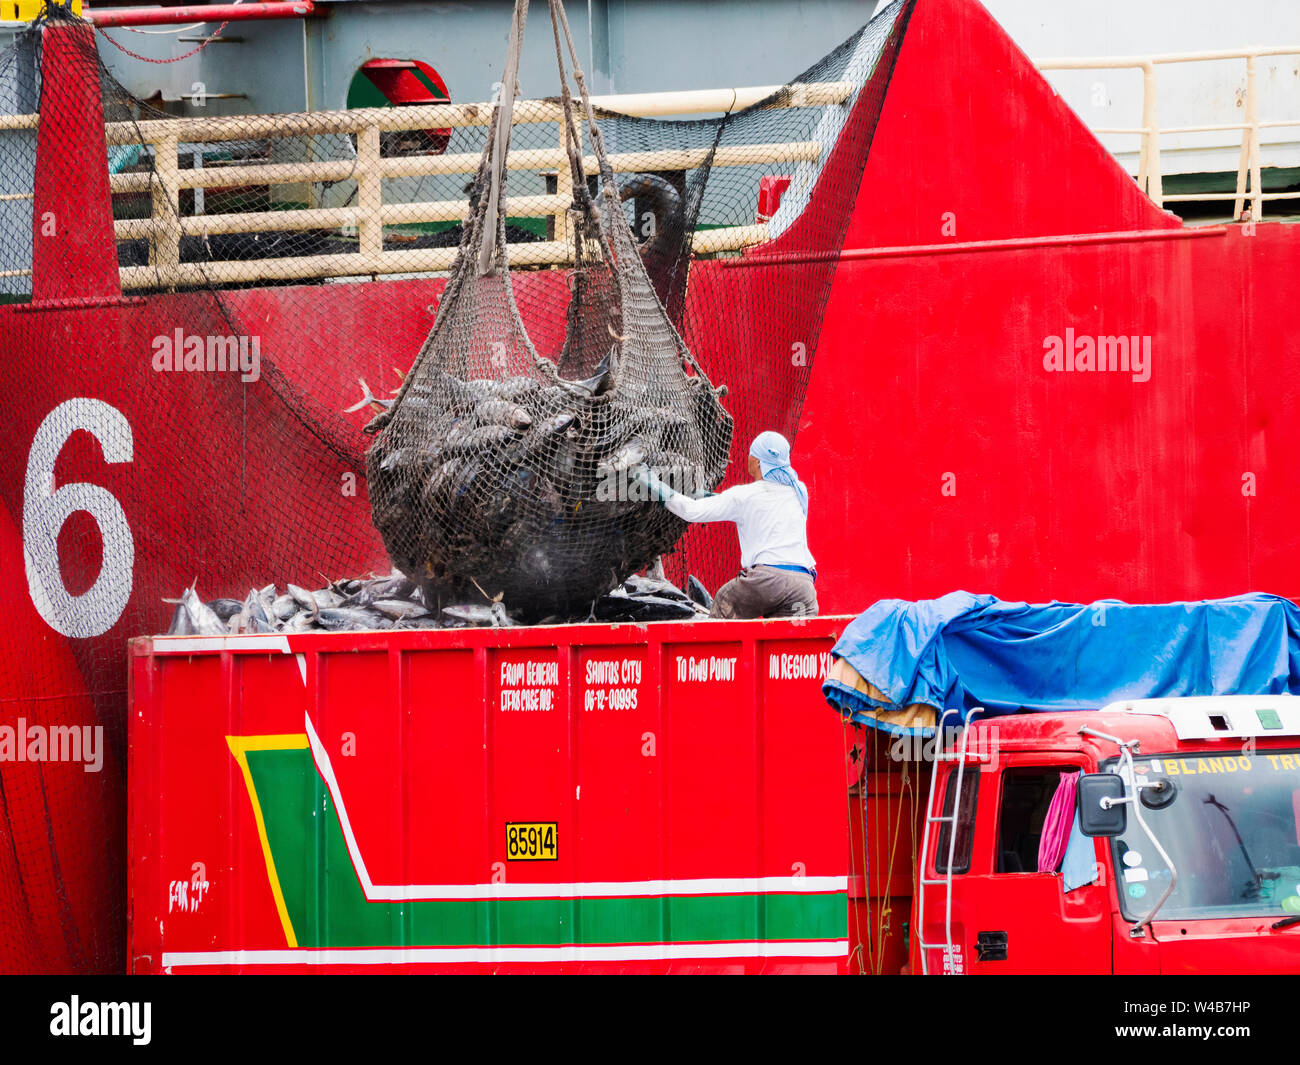 General Santos City, The Philippines - October 16, 2018: Frozen yellowfin tuna being loaded onto a truck from a feeder ship at the fishing port of Gen Stock Photo